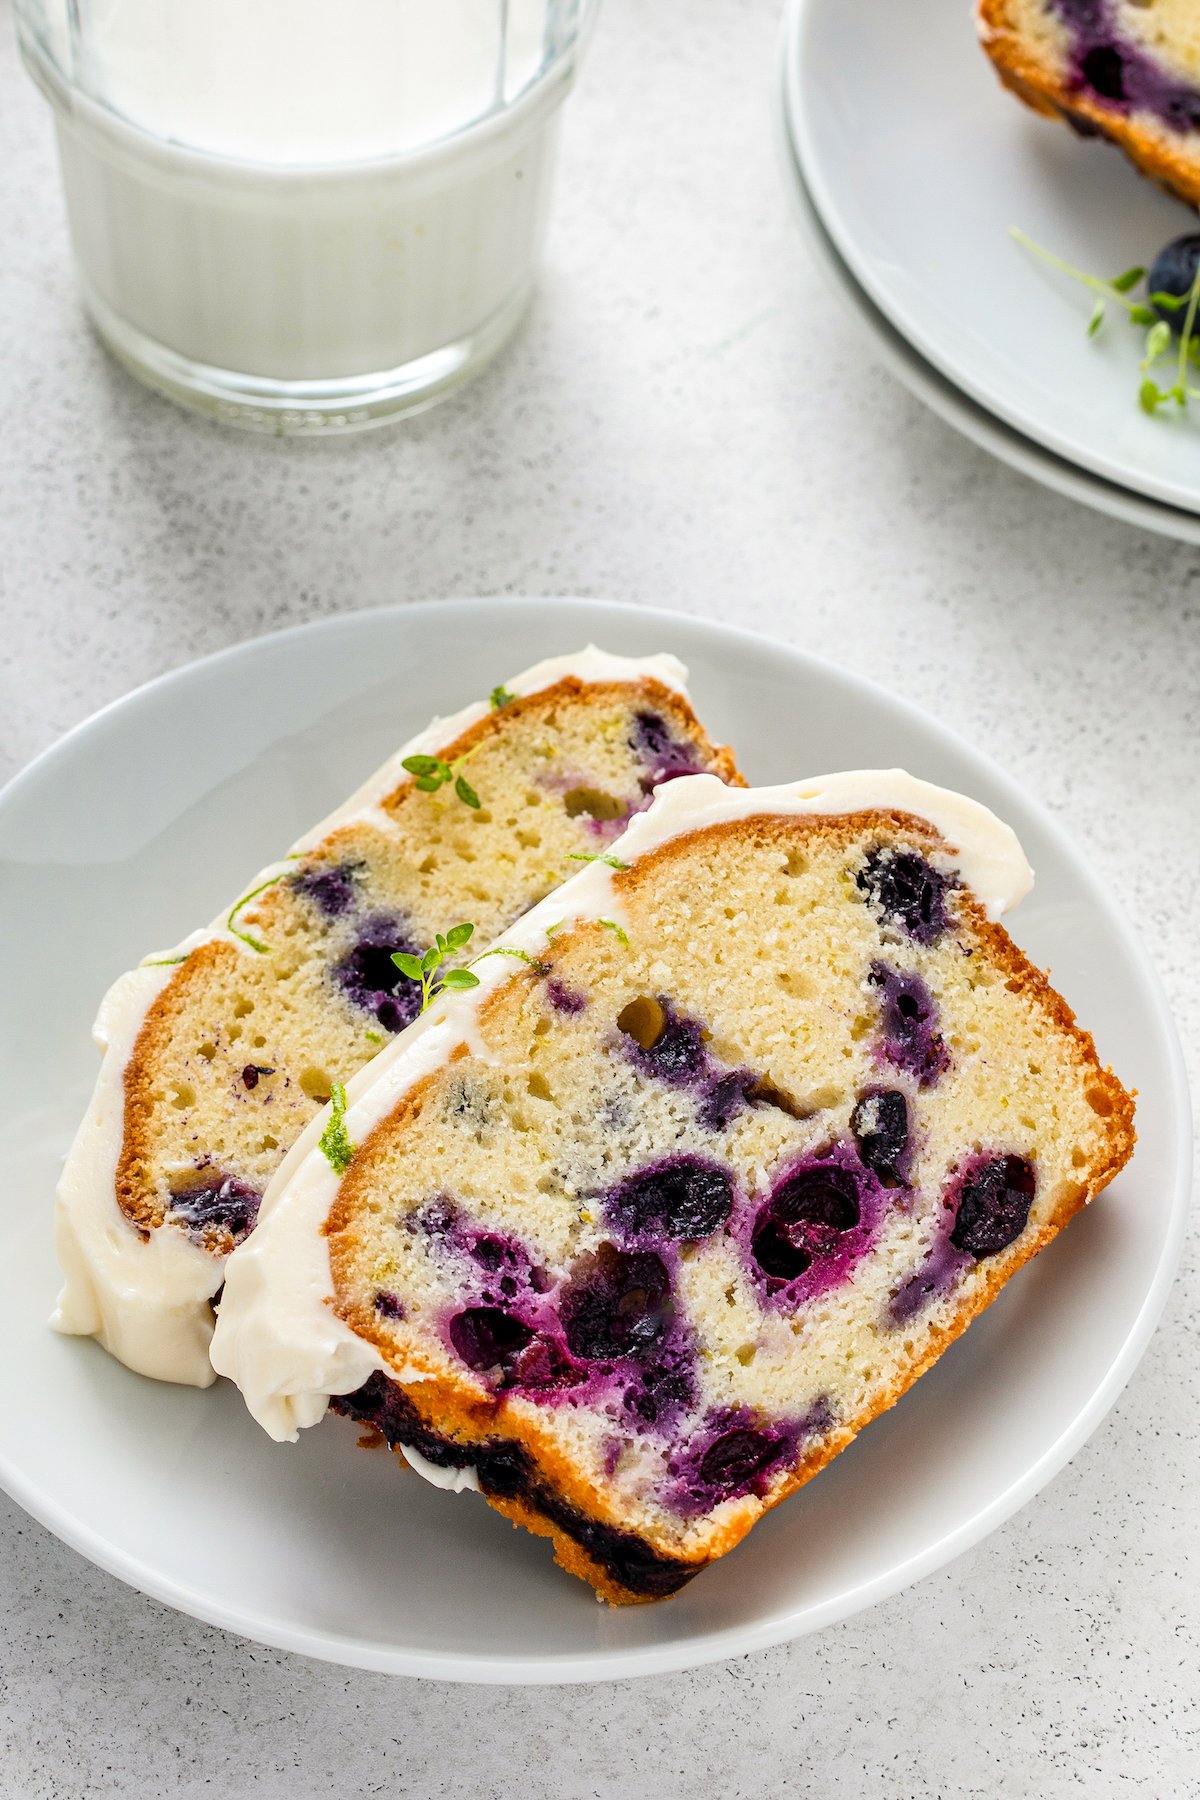 Moist and dense cream cheese pound cake loaded with blueberries and lime zest and topped with cream cheese frosting sliced into pieces and served on a plate.